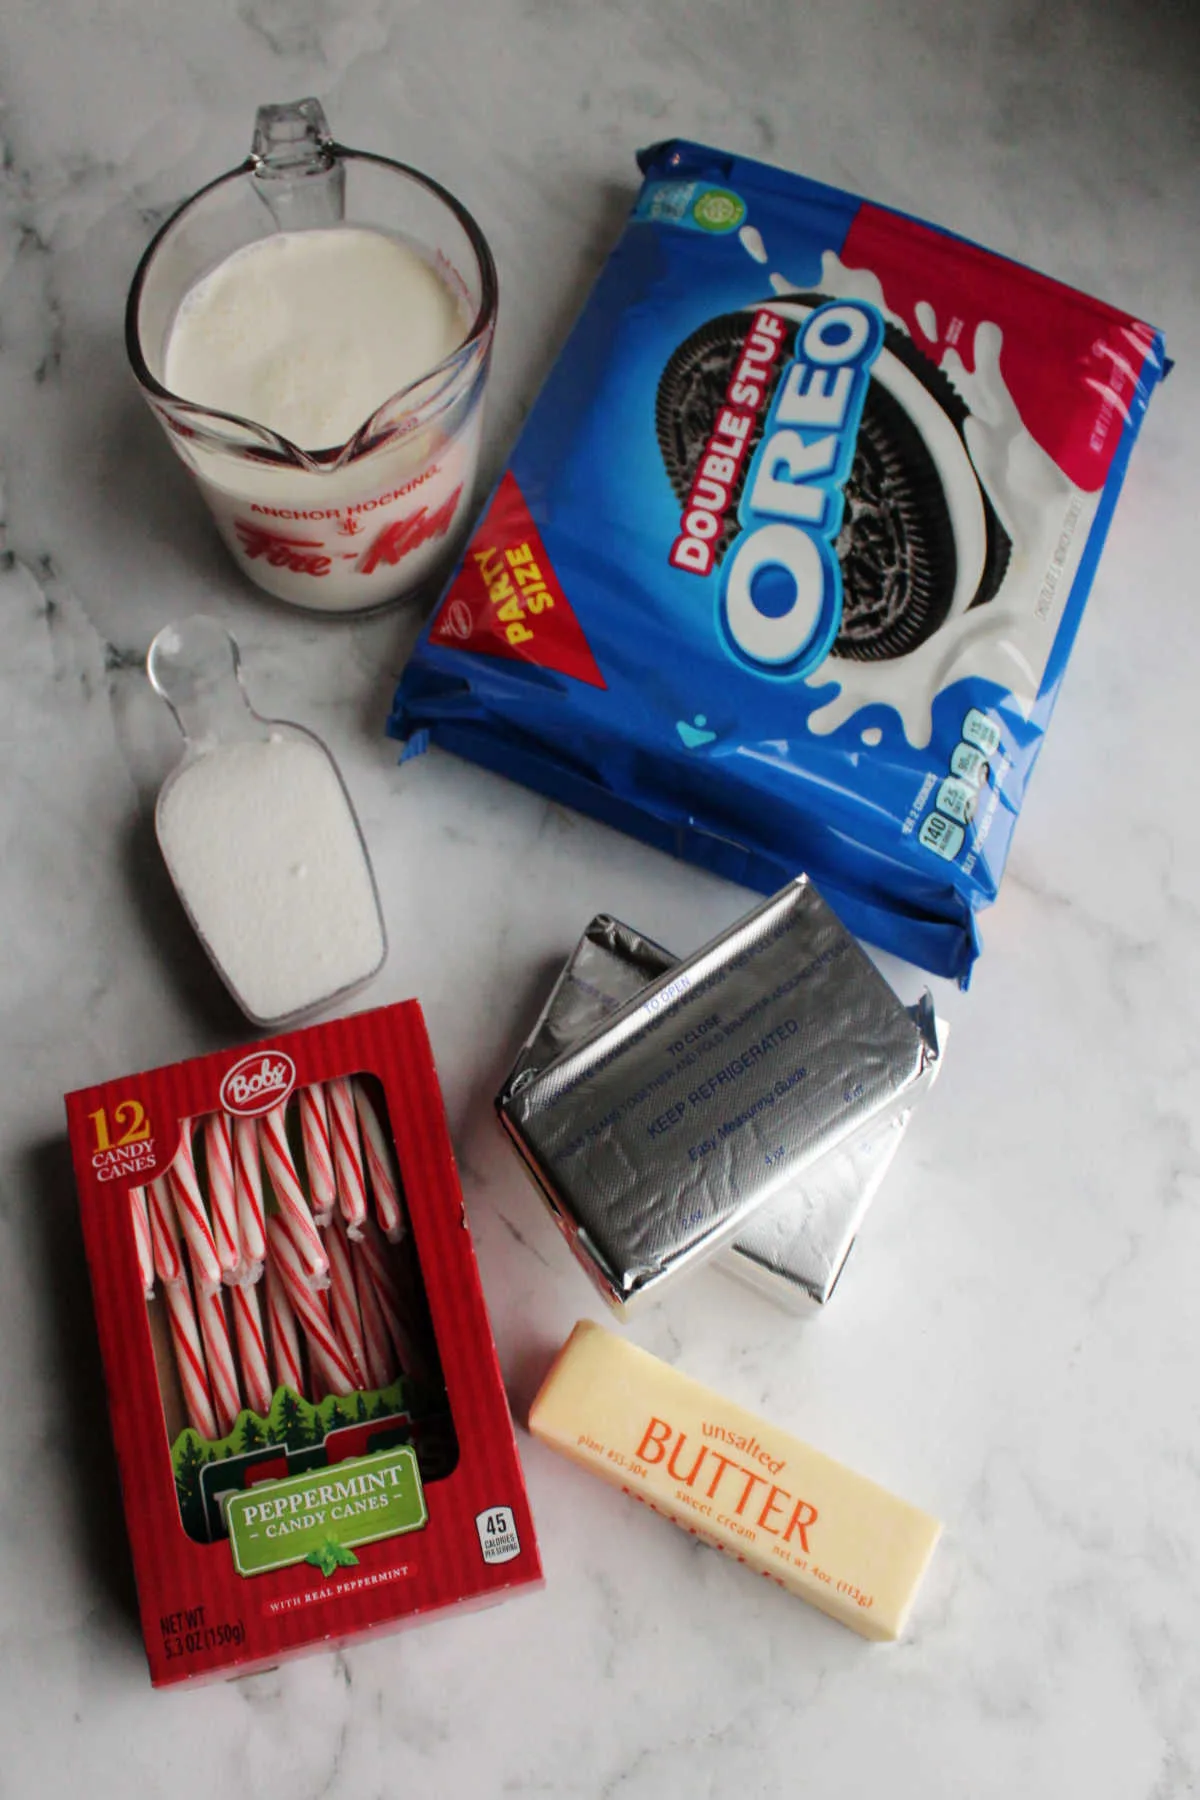 Ingredients including Oreos, cream cheese, cream, butter, sugar and candy canes ready to be made into no bake cheesecake.